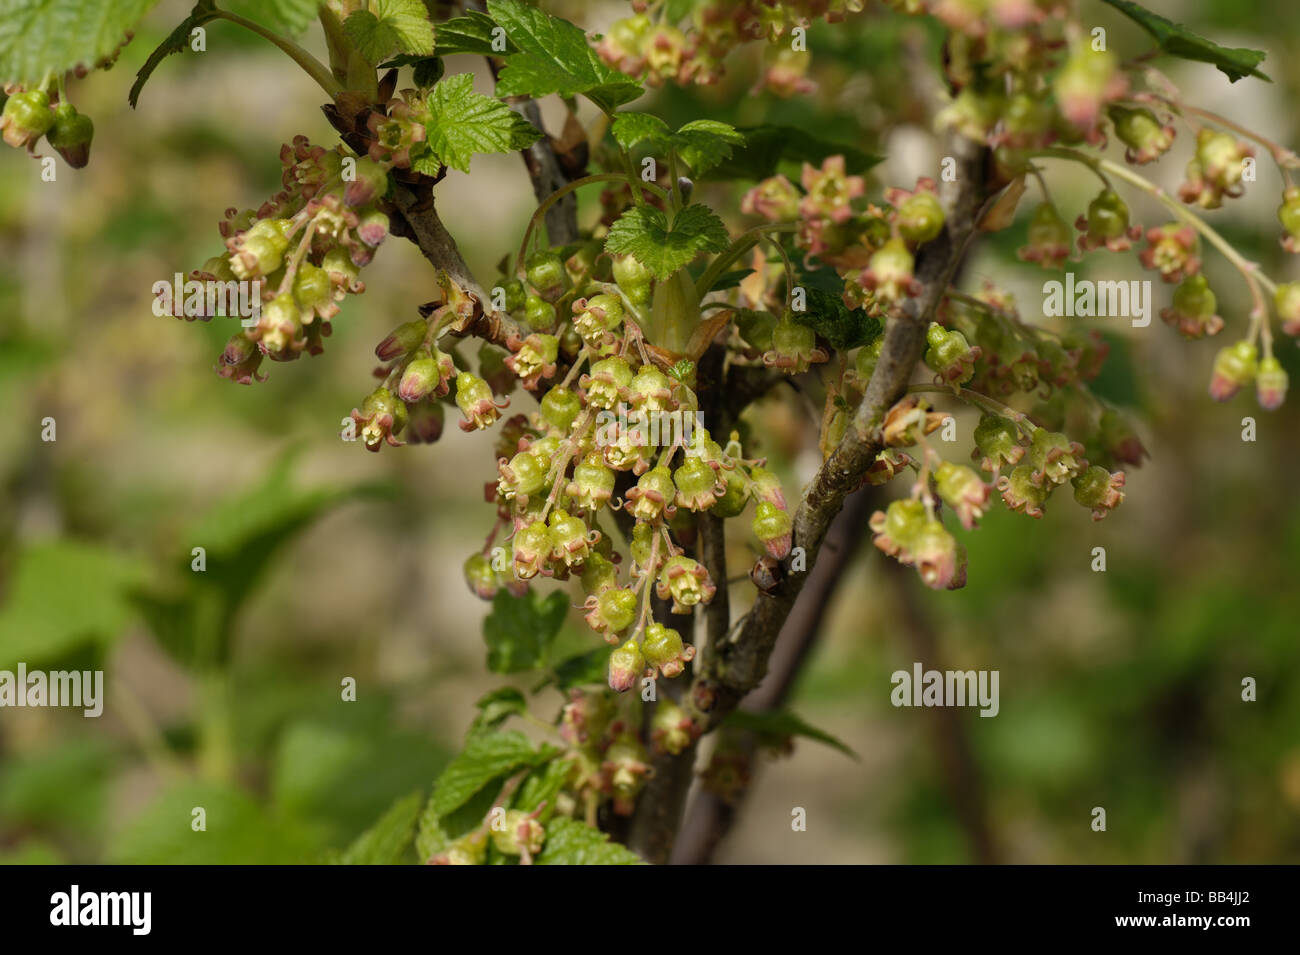 Black currants Ribes nigrum flowers with young fruit at fruit set Stock Photo